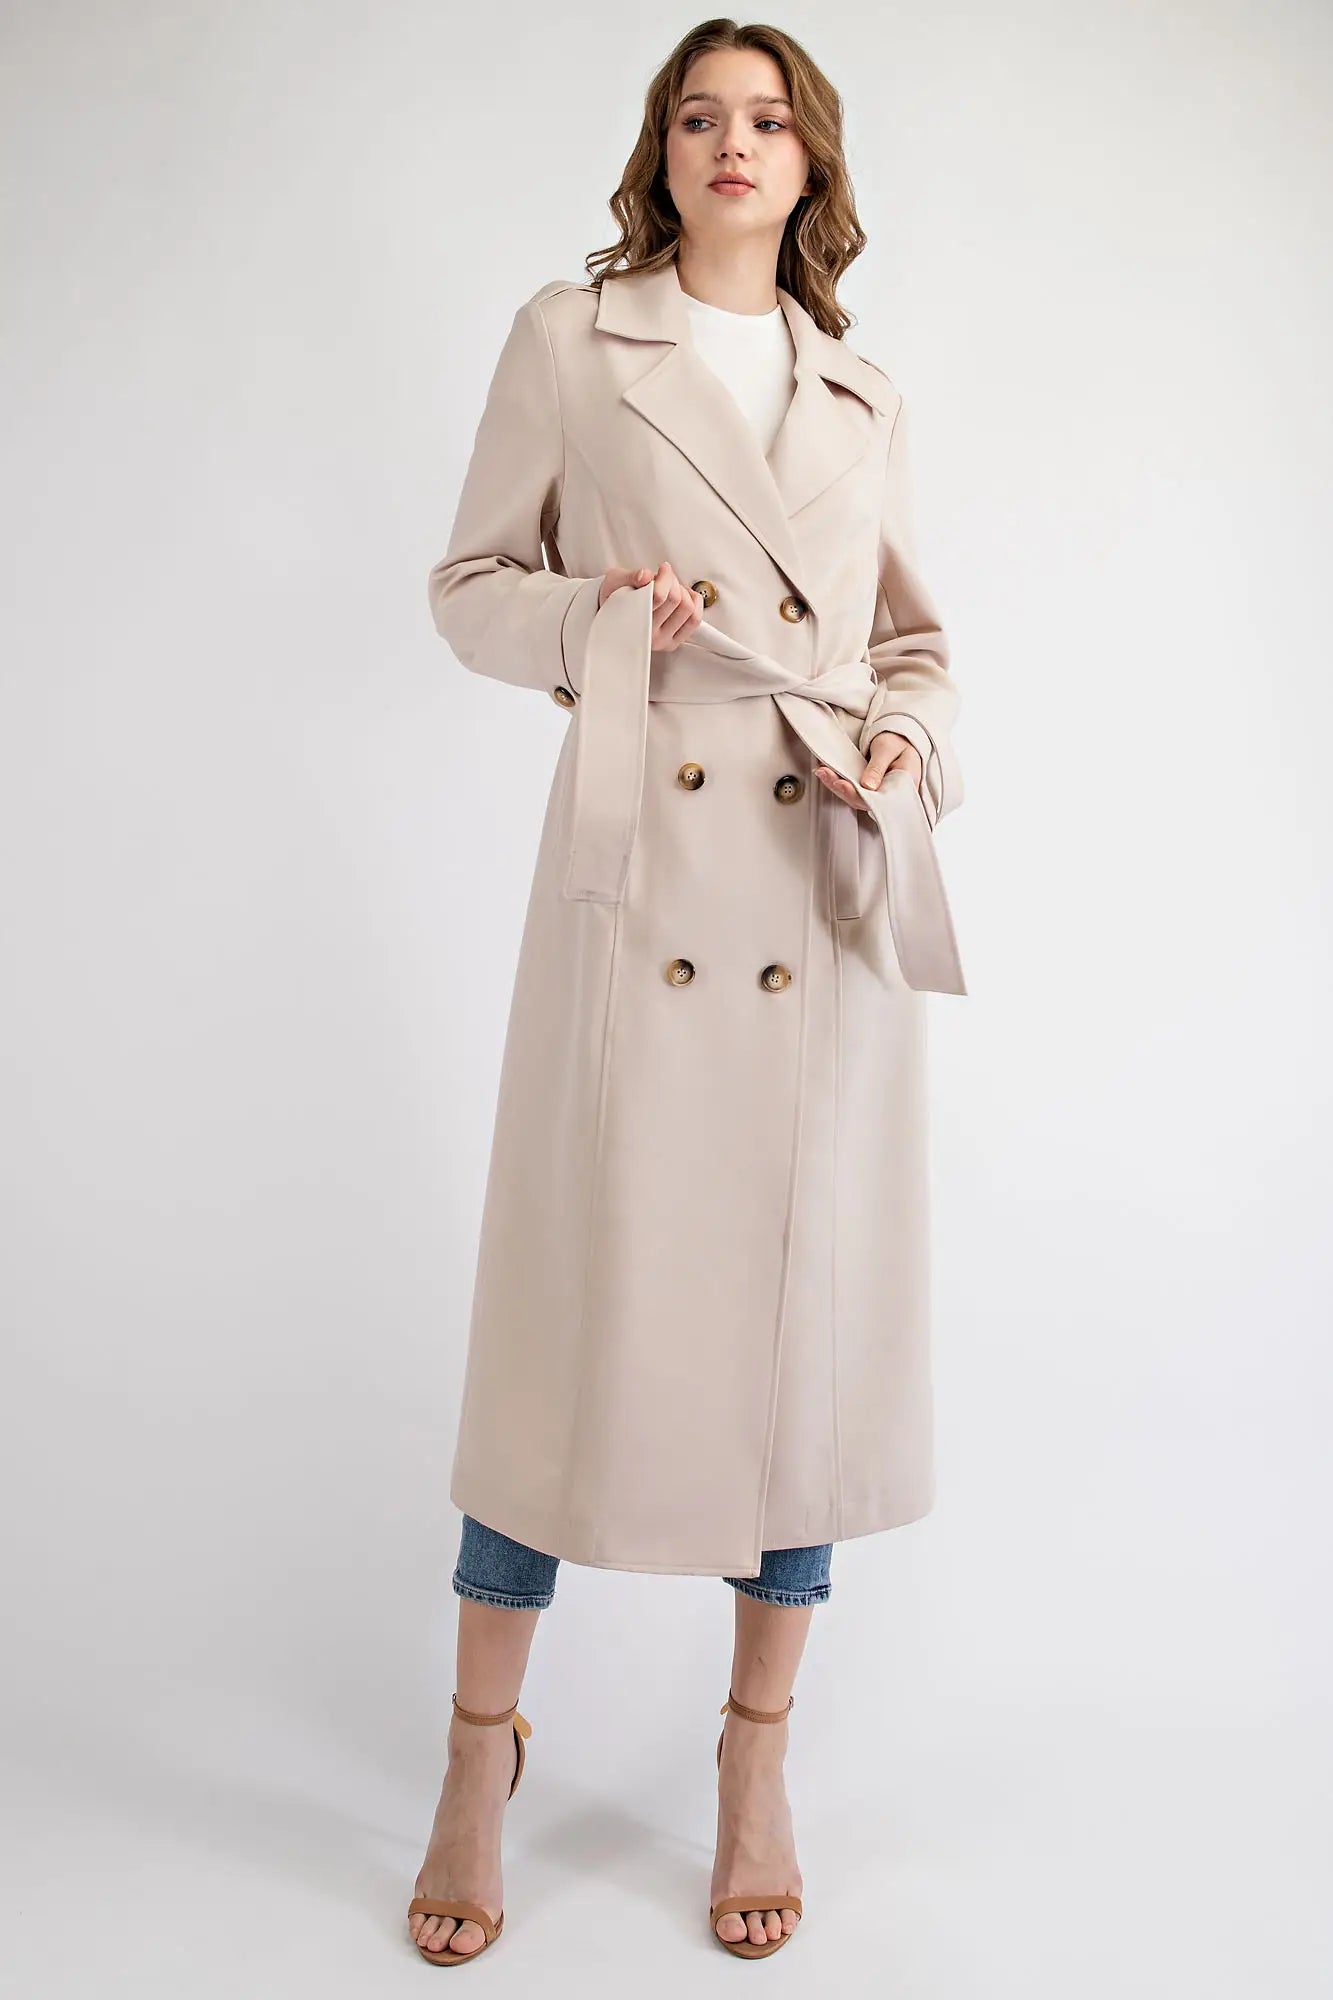 The double-breasted front features large buttons for a traditional look, while the notched lapel and belted waist add to the elegant silhouette. The coat has two side pockets for added convenience and a back vent for ease of movement.